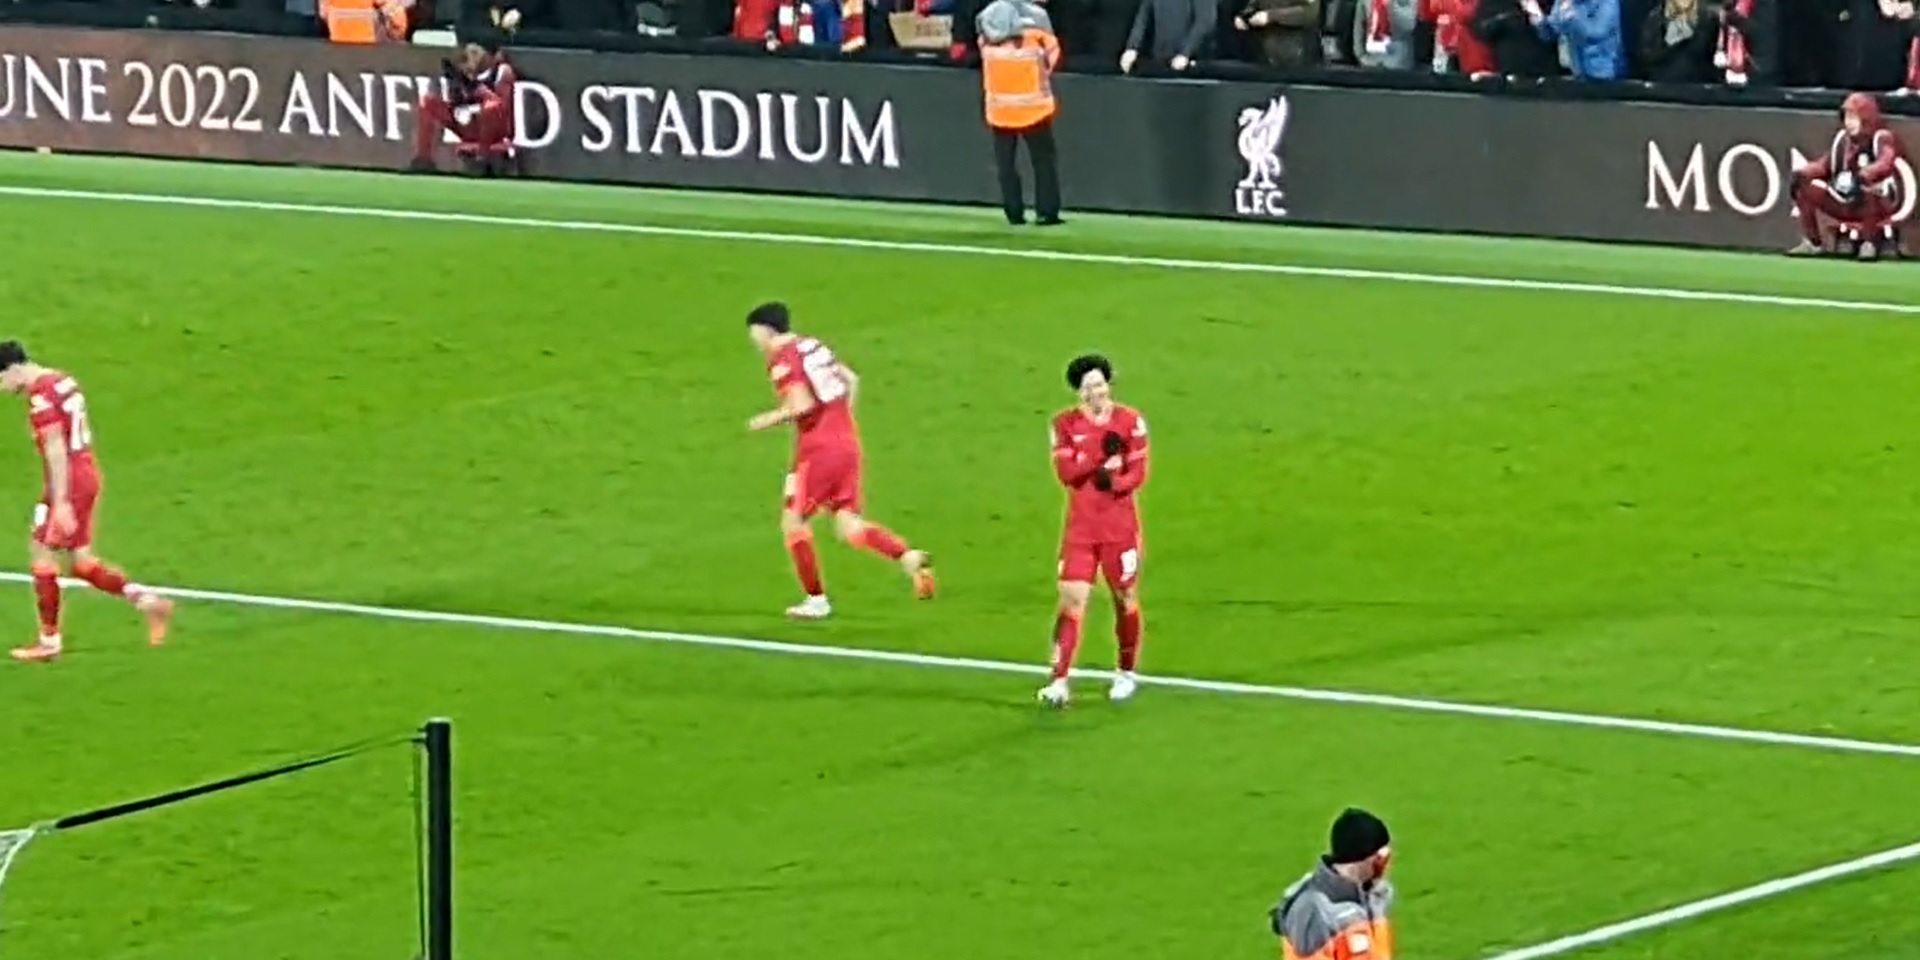 (Video) Watch league cup hero Minamino proudly tugging the Liverpool badge after netting equaliser